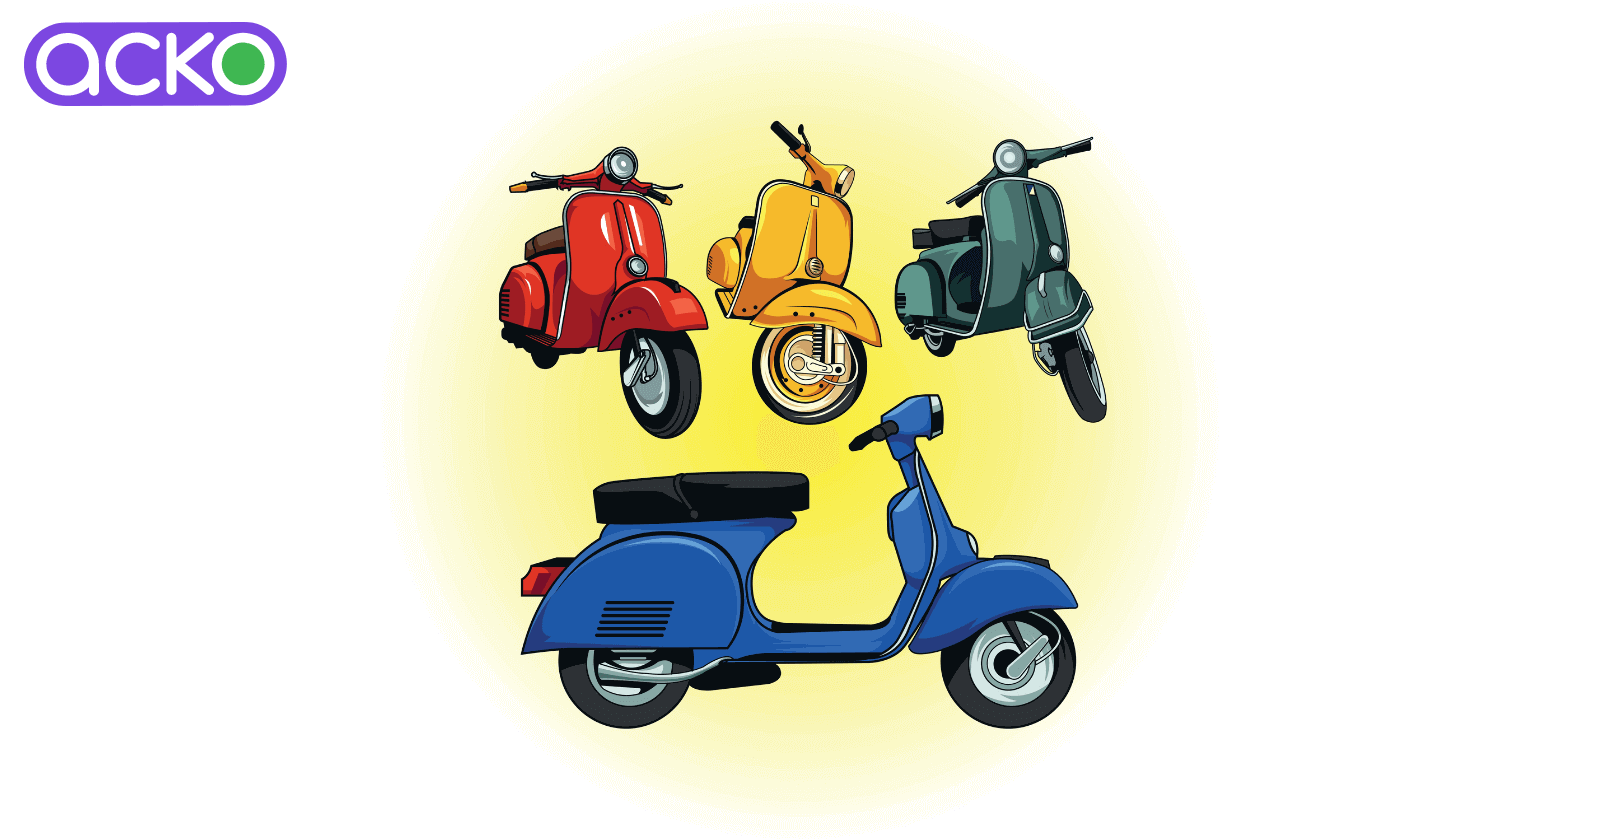 Top Selling Scooters in India: Top Models, Price and Performance